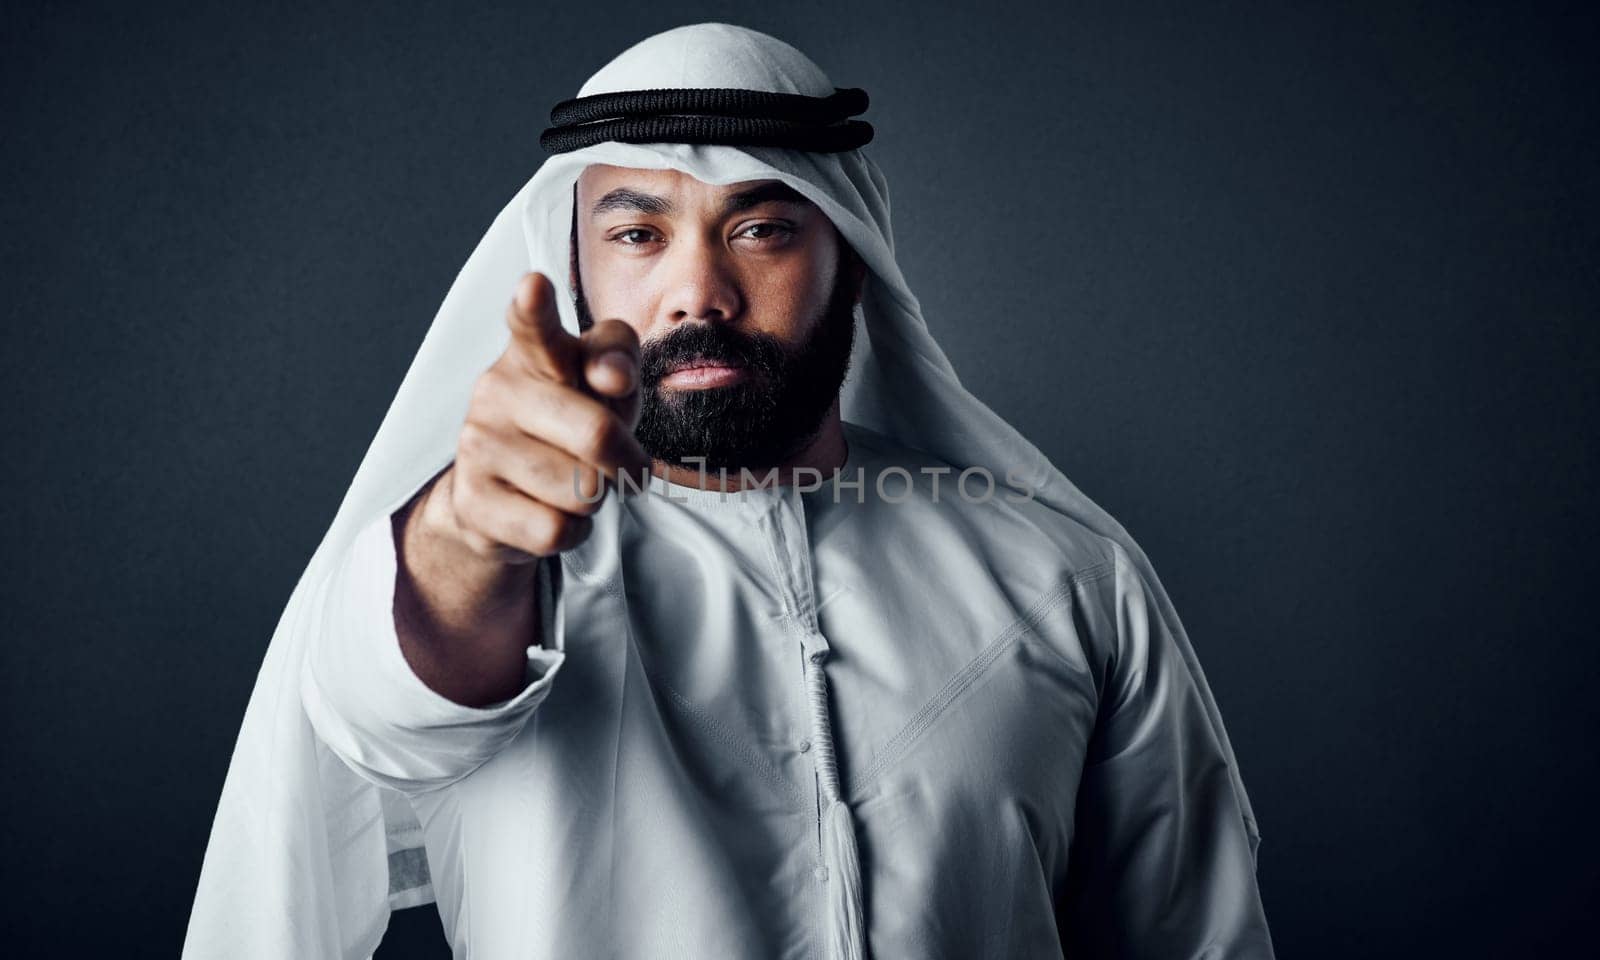 You are in charge of the success of your business. Studio shot of a young man dressed in Islamic traditional clothing posing against a dark background. by YuriArcurs